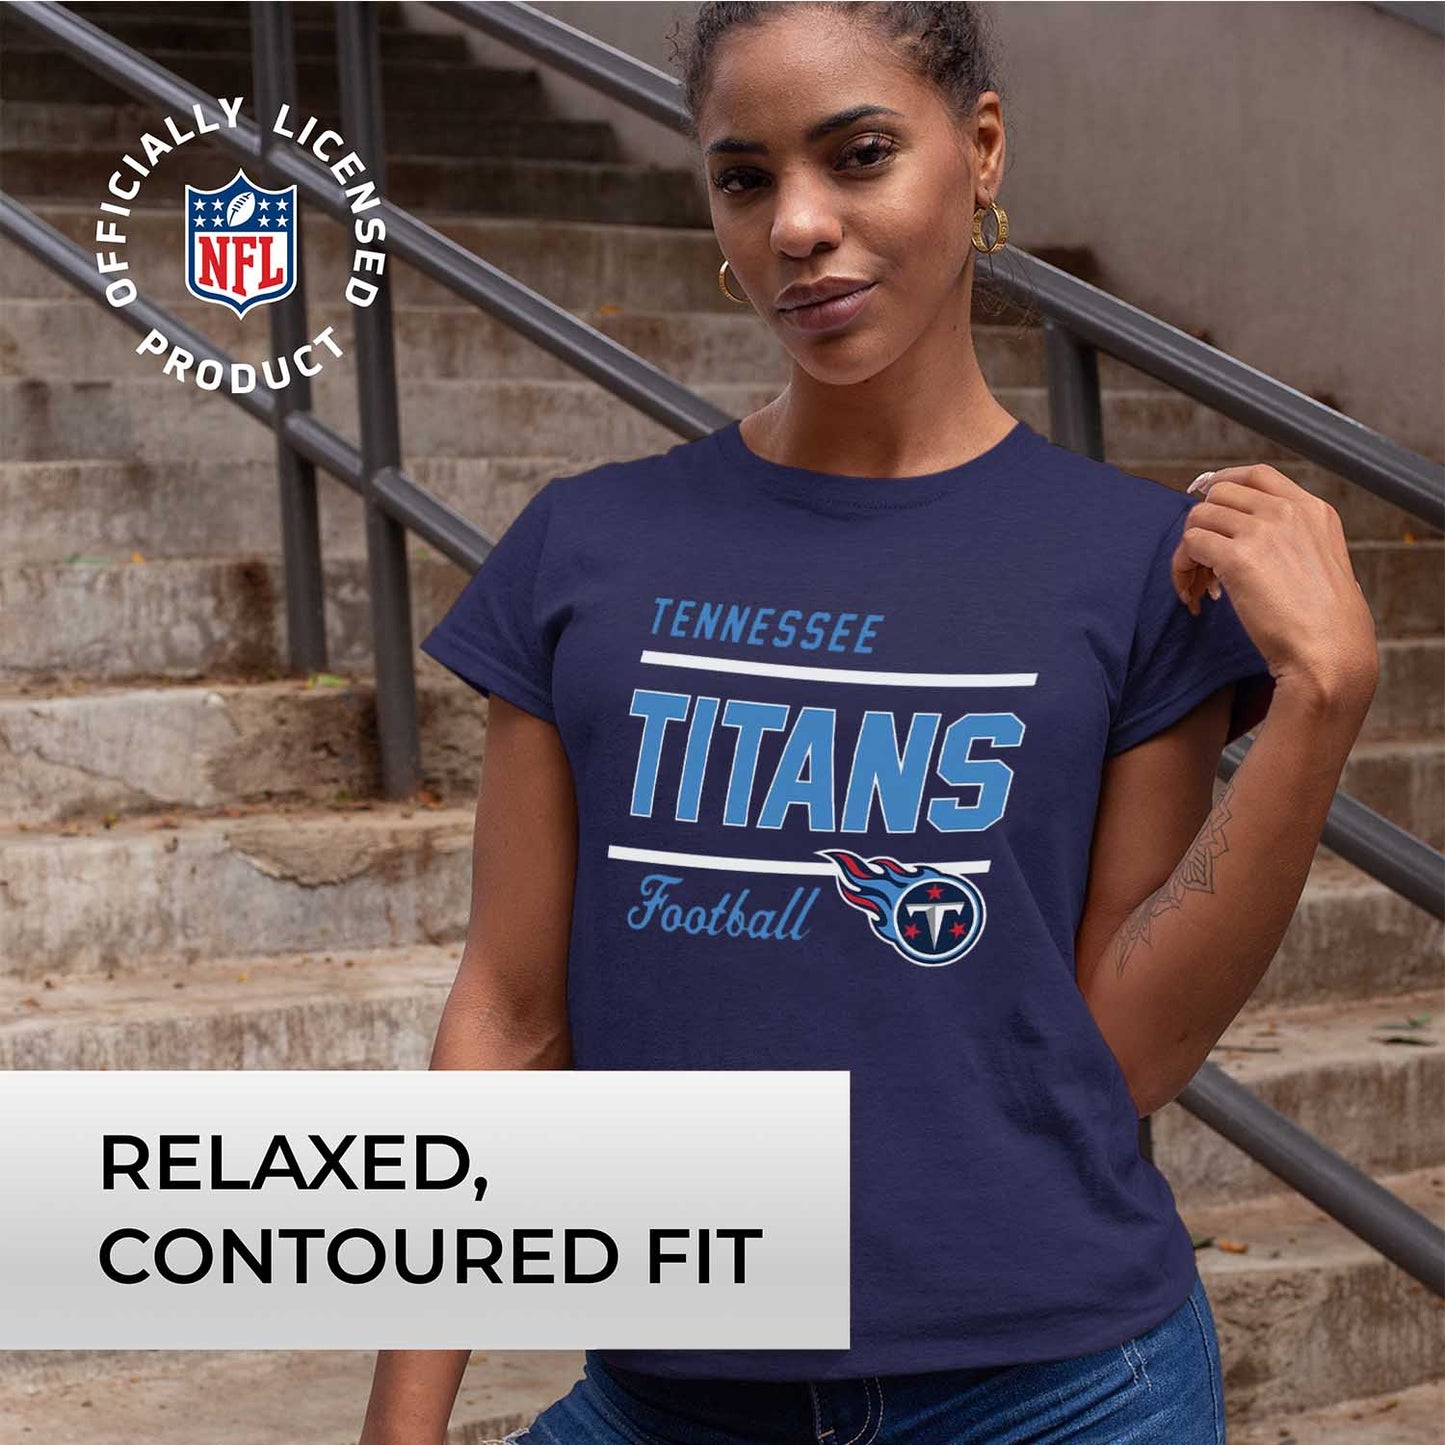 Tennessee Titans NFL Gameday Women's Relaxed Fit T-shirt - Navy